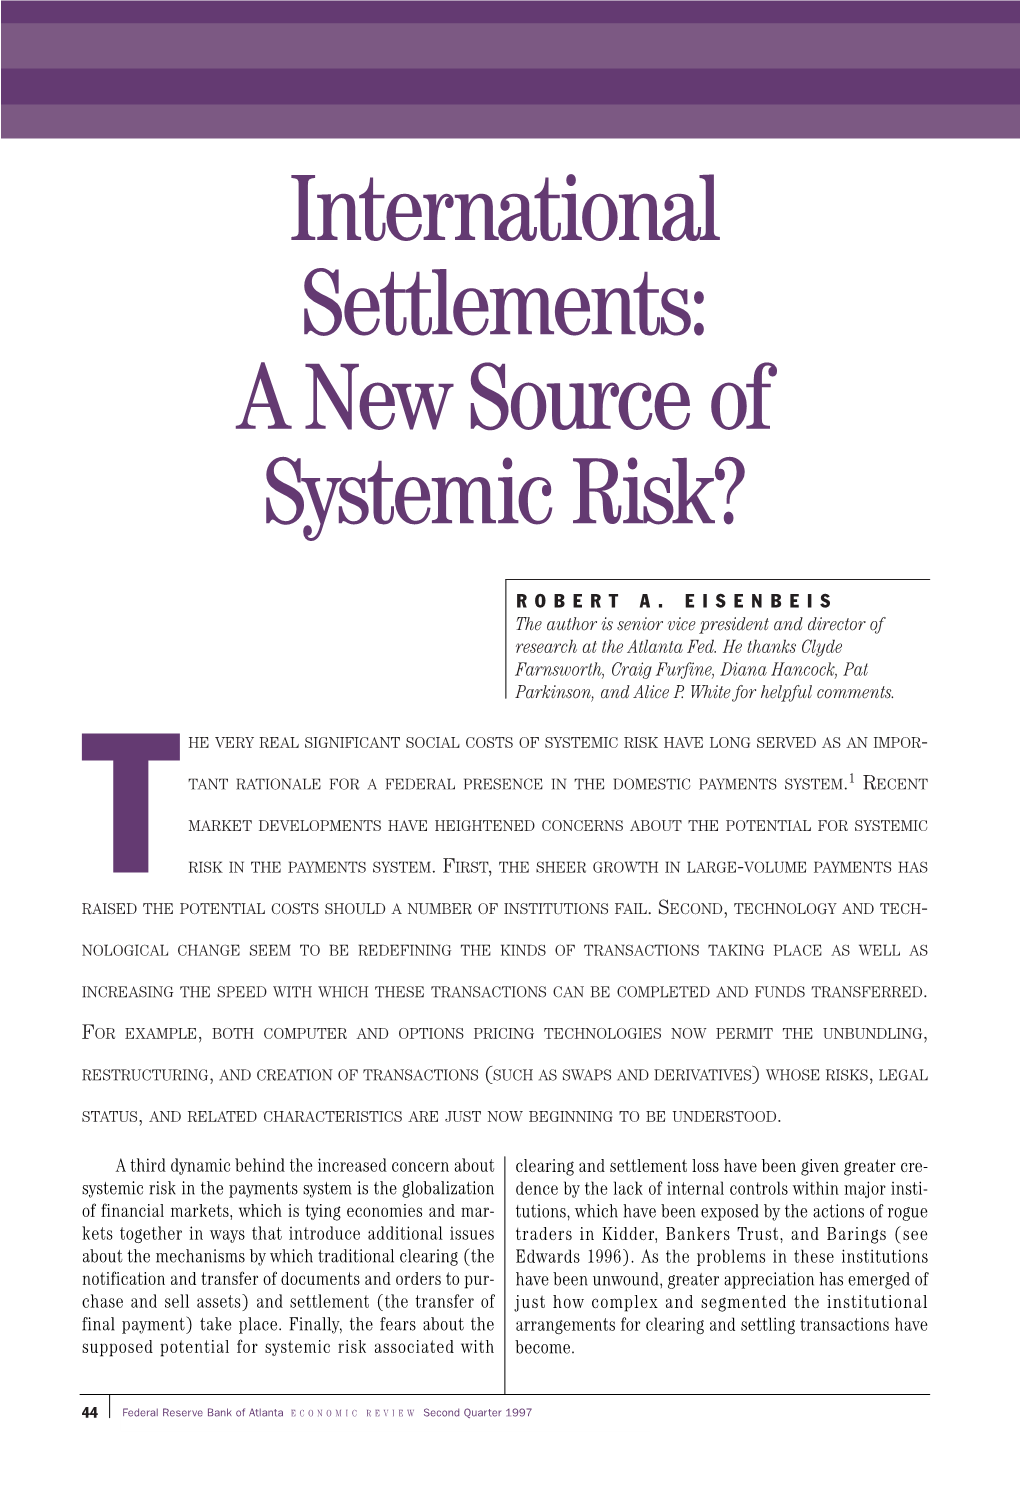 International Settlements: a New Source of Systemic Risk?